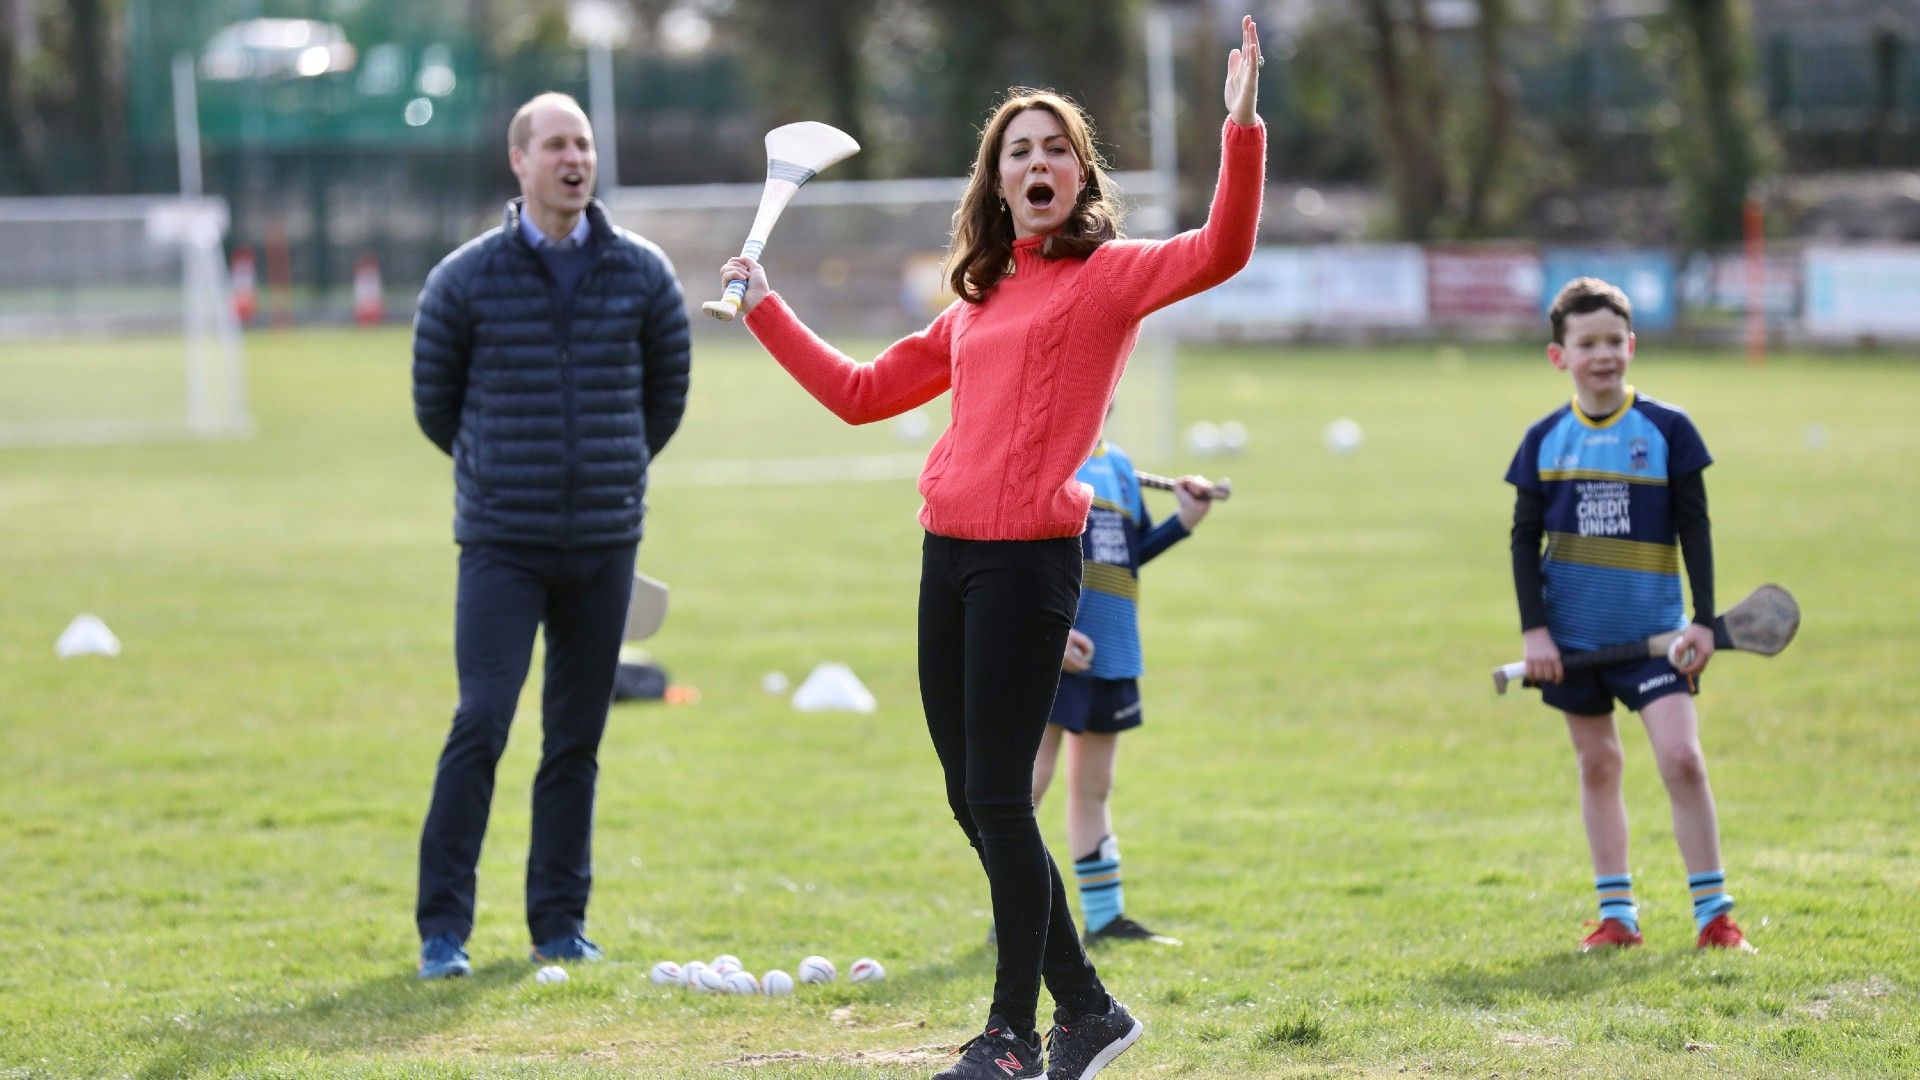 <p>                     From hockey to tennis and water polo, athleticism is just one of the many things which unite the Prince and Princess of Wales.                   </p>                                      <p>                     And during a visit to Ireland in 2020, Kate's hilarious reactions got the best of her as she clearly got heavily invested in a competition with William.                   </p>                                      <p>                     Their competitiveness has been discussed many times throughout the years, and Kate acknowledged it herself during an appearance on Mike Tindall's <em>The Good, The Bad and The Rugby</em> podcast in September 2023.                   </p>                                      <p>                     Joining William and Princess Anne ahead of the Rugby World Cup for the special episode, Kate tried to deny her competitive nature at first, before Mike told listeners "I've seen her play beer pong, she is!"                   </p>                                      <p>                     She then revealed all, saying "I don't think we've [she and William] actually managed to finish a game of tennis... It becomes a mental challenge between the two of us."                   </p>